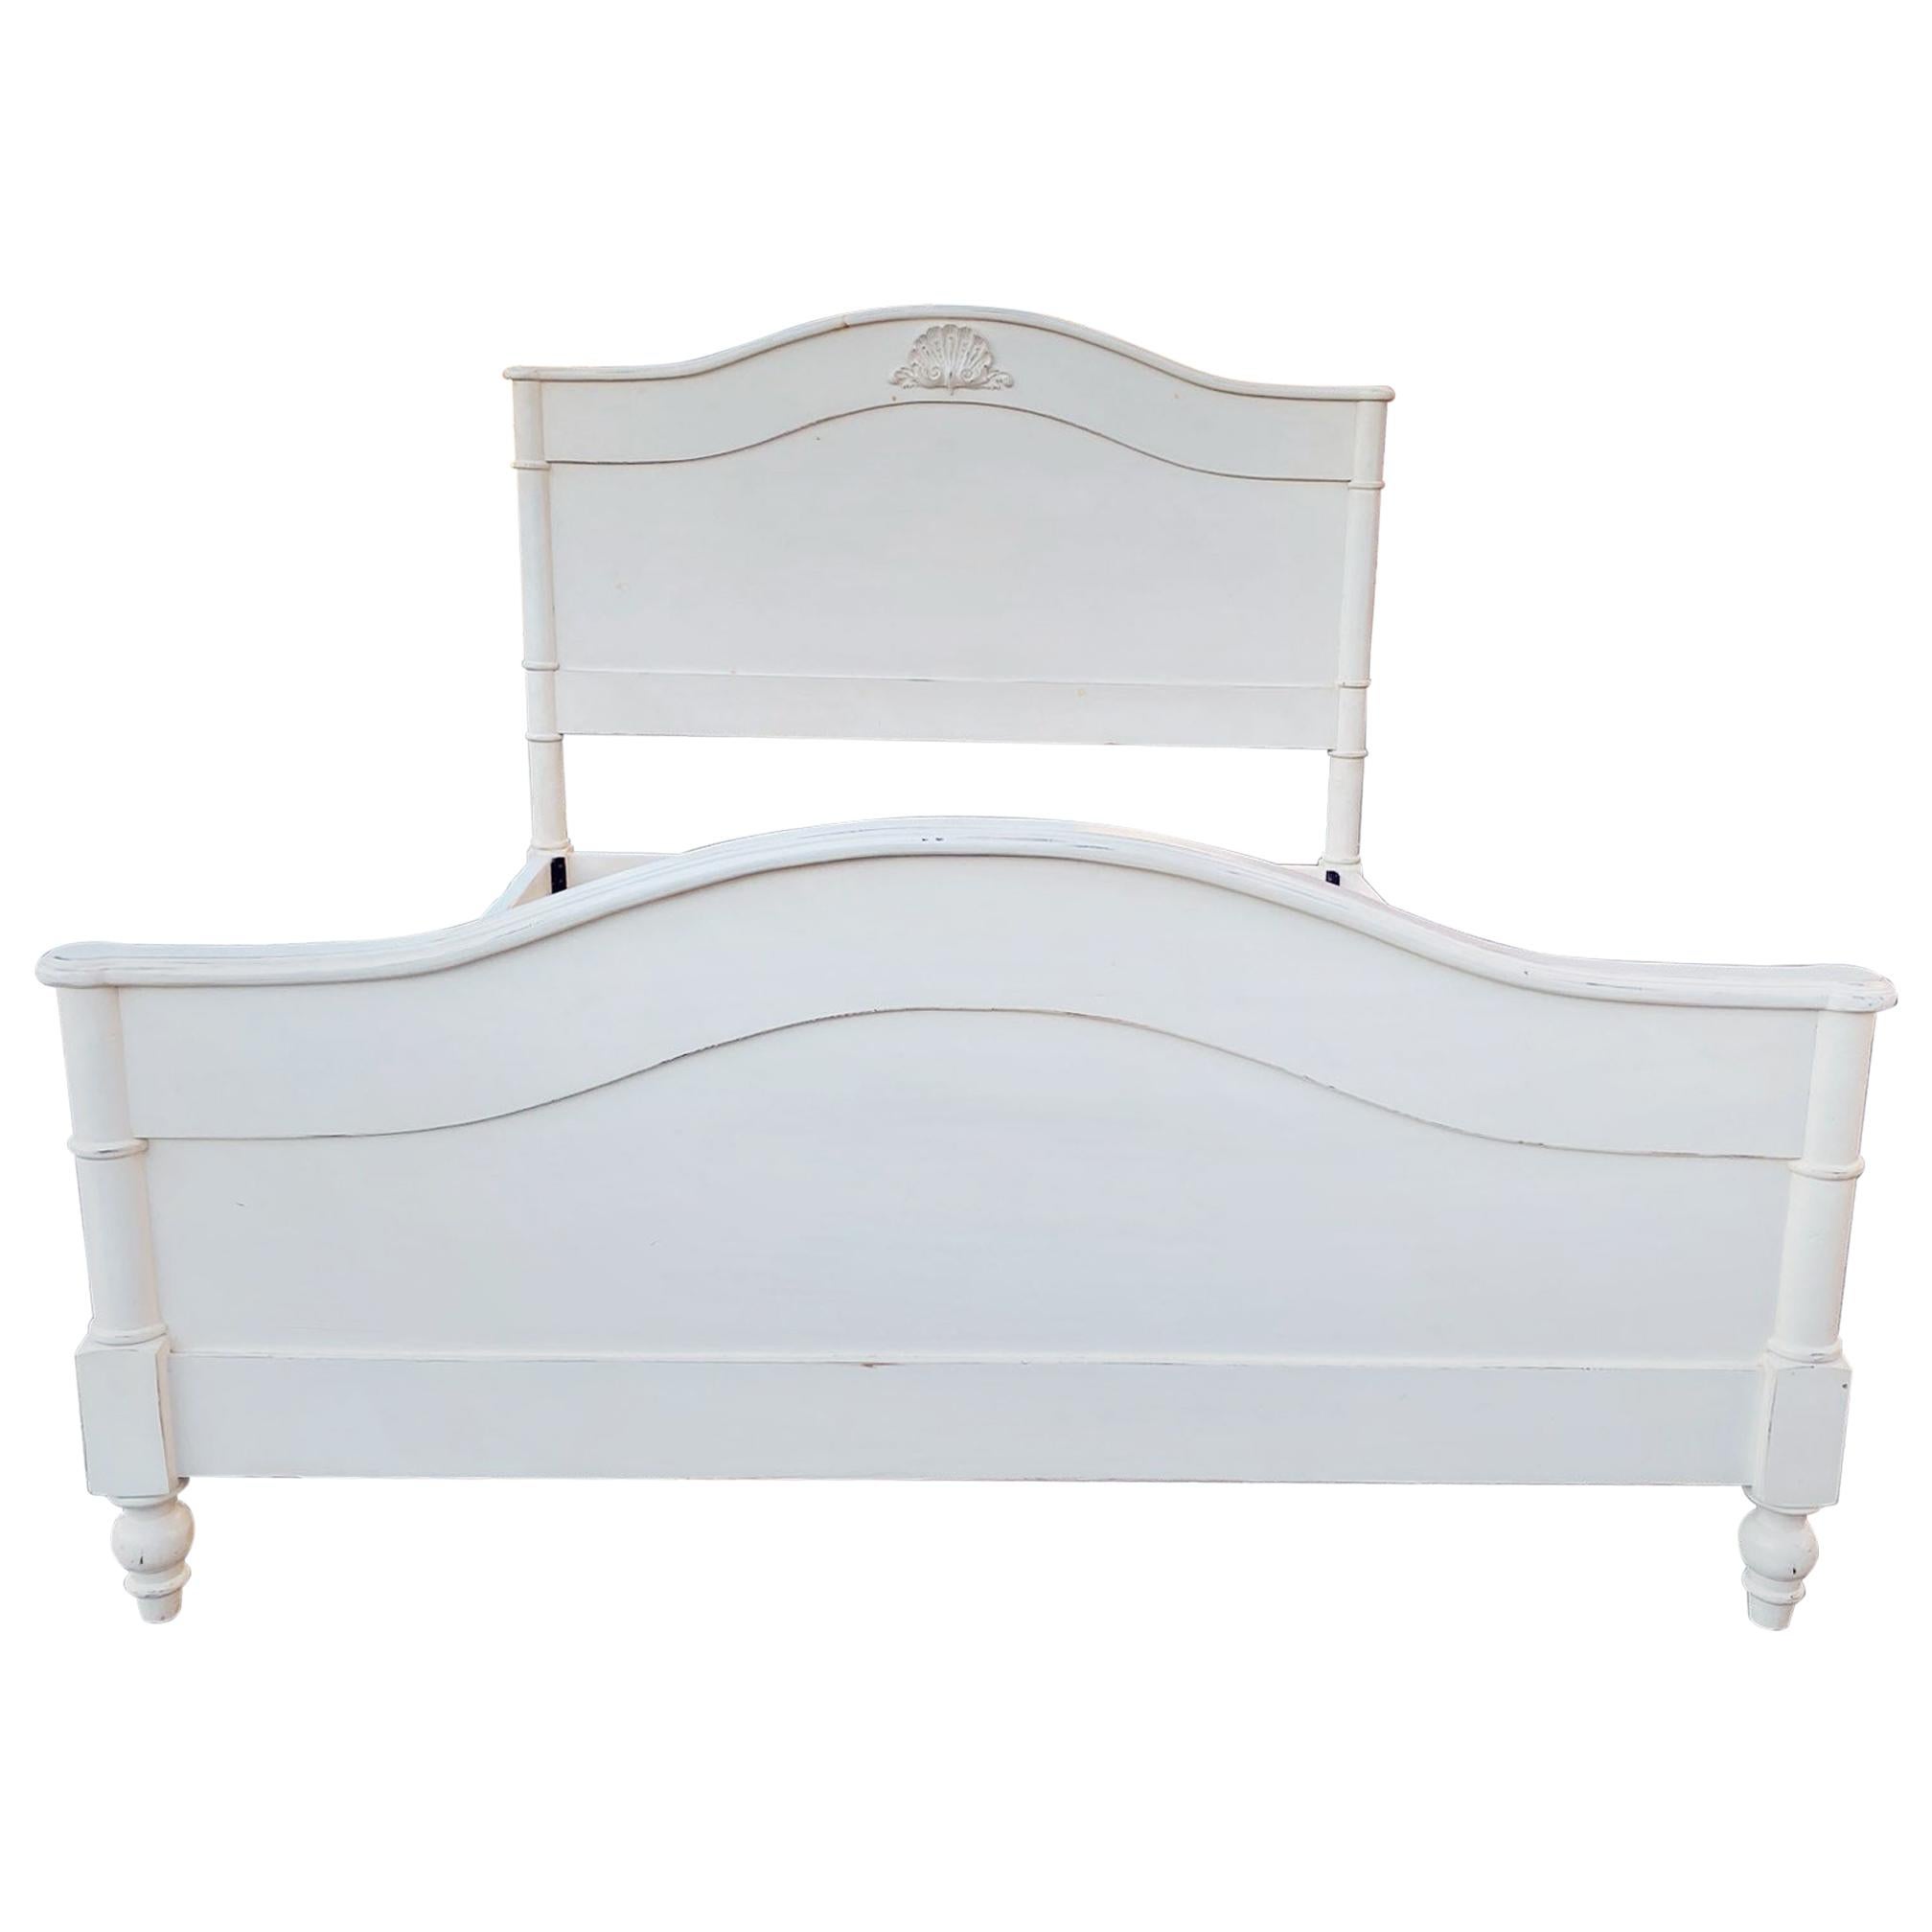 Vintage Queen Bed In Antique White For, Antique Wooden Queen Bed Frame